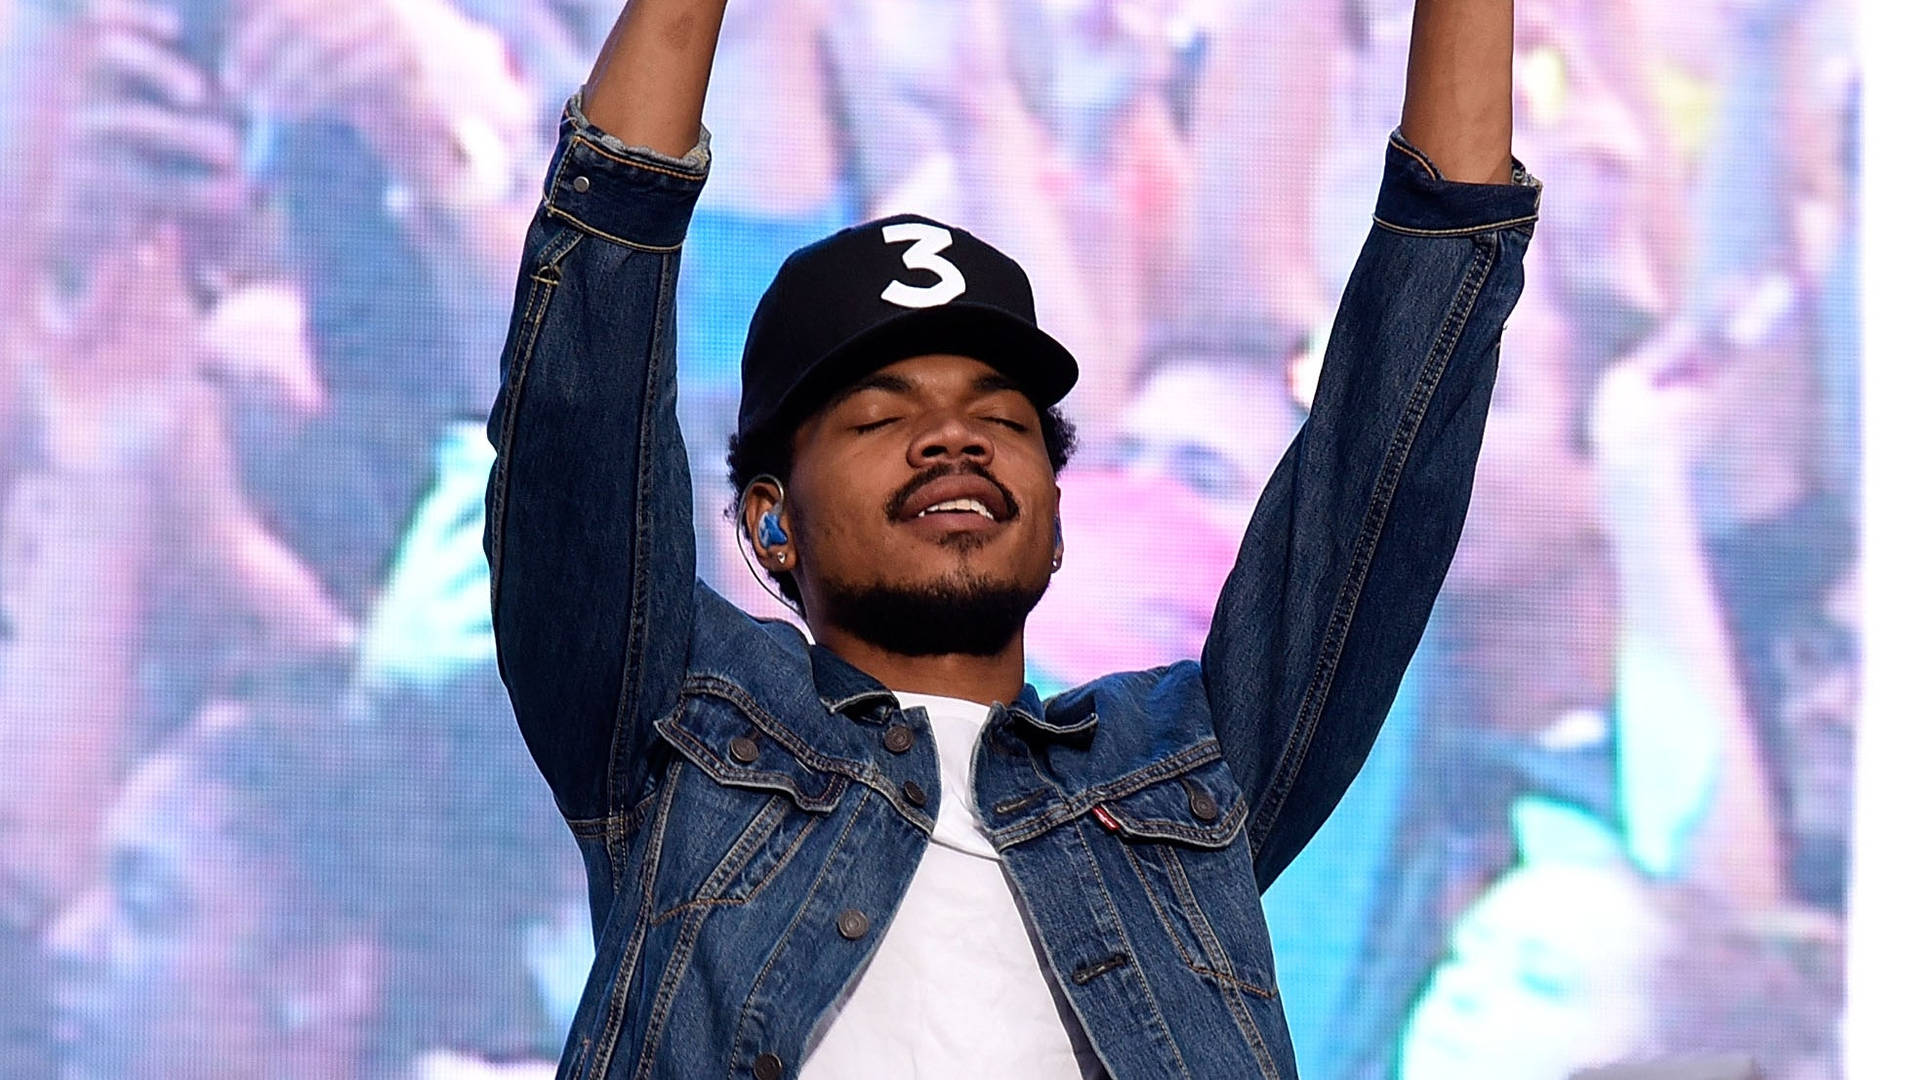 Immoment Chance The Rapper Wallpaper